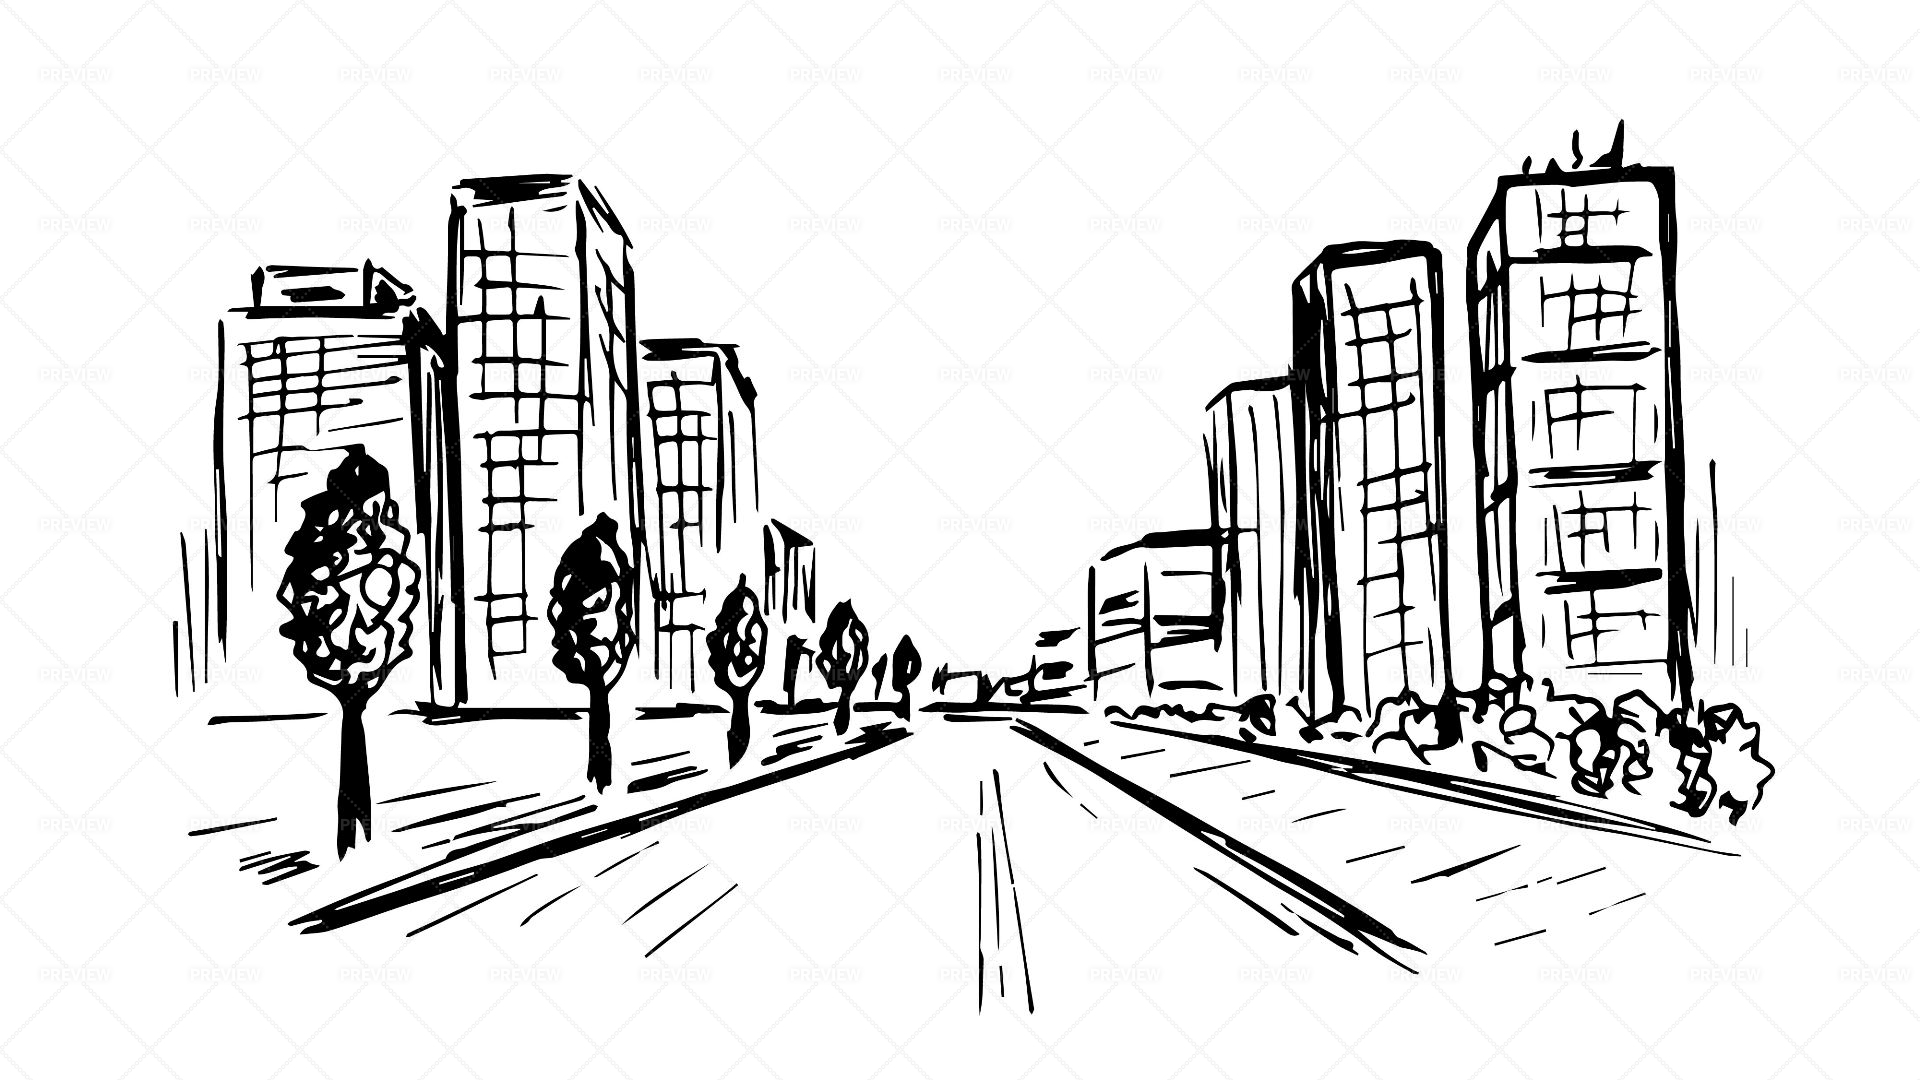 How to Draw a City Street in One Point Perspective - YouTube